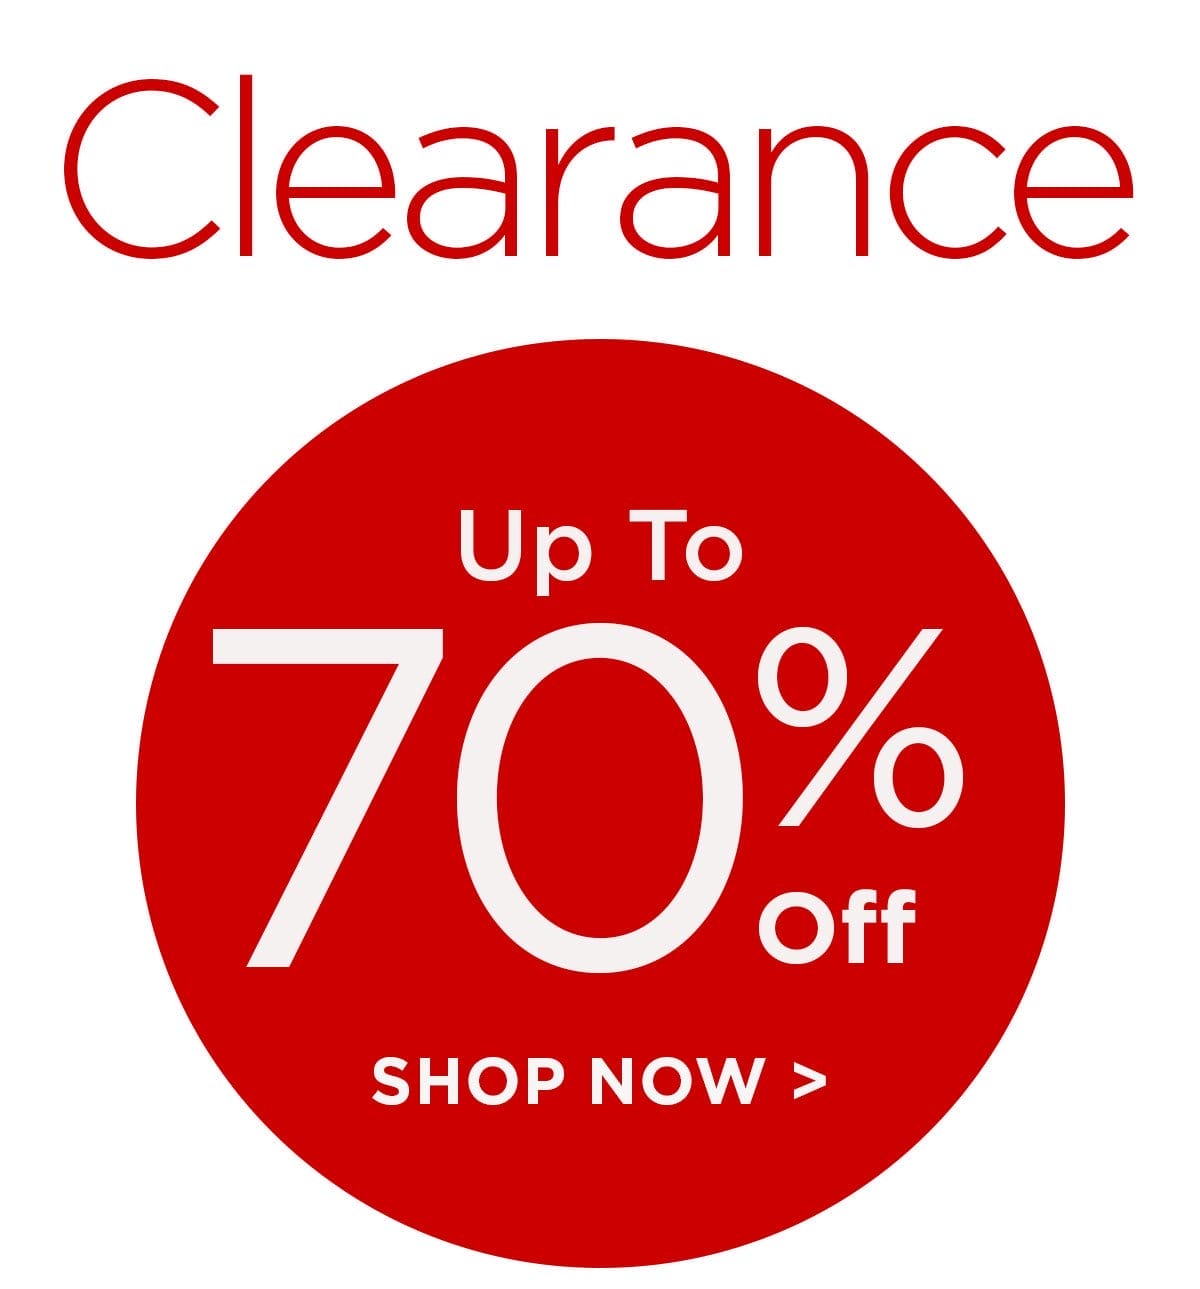 Clearance - Up To 70% Off - Shop Now